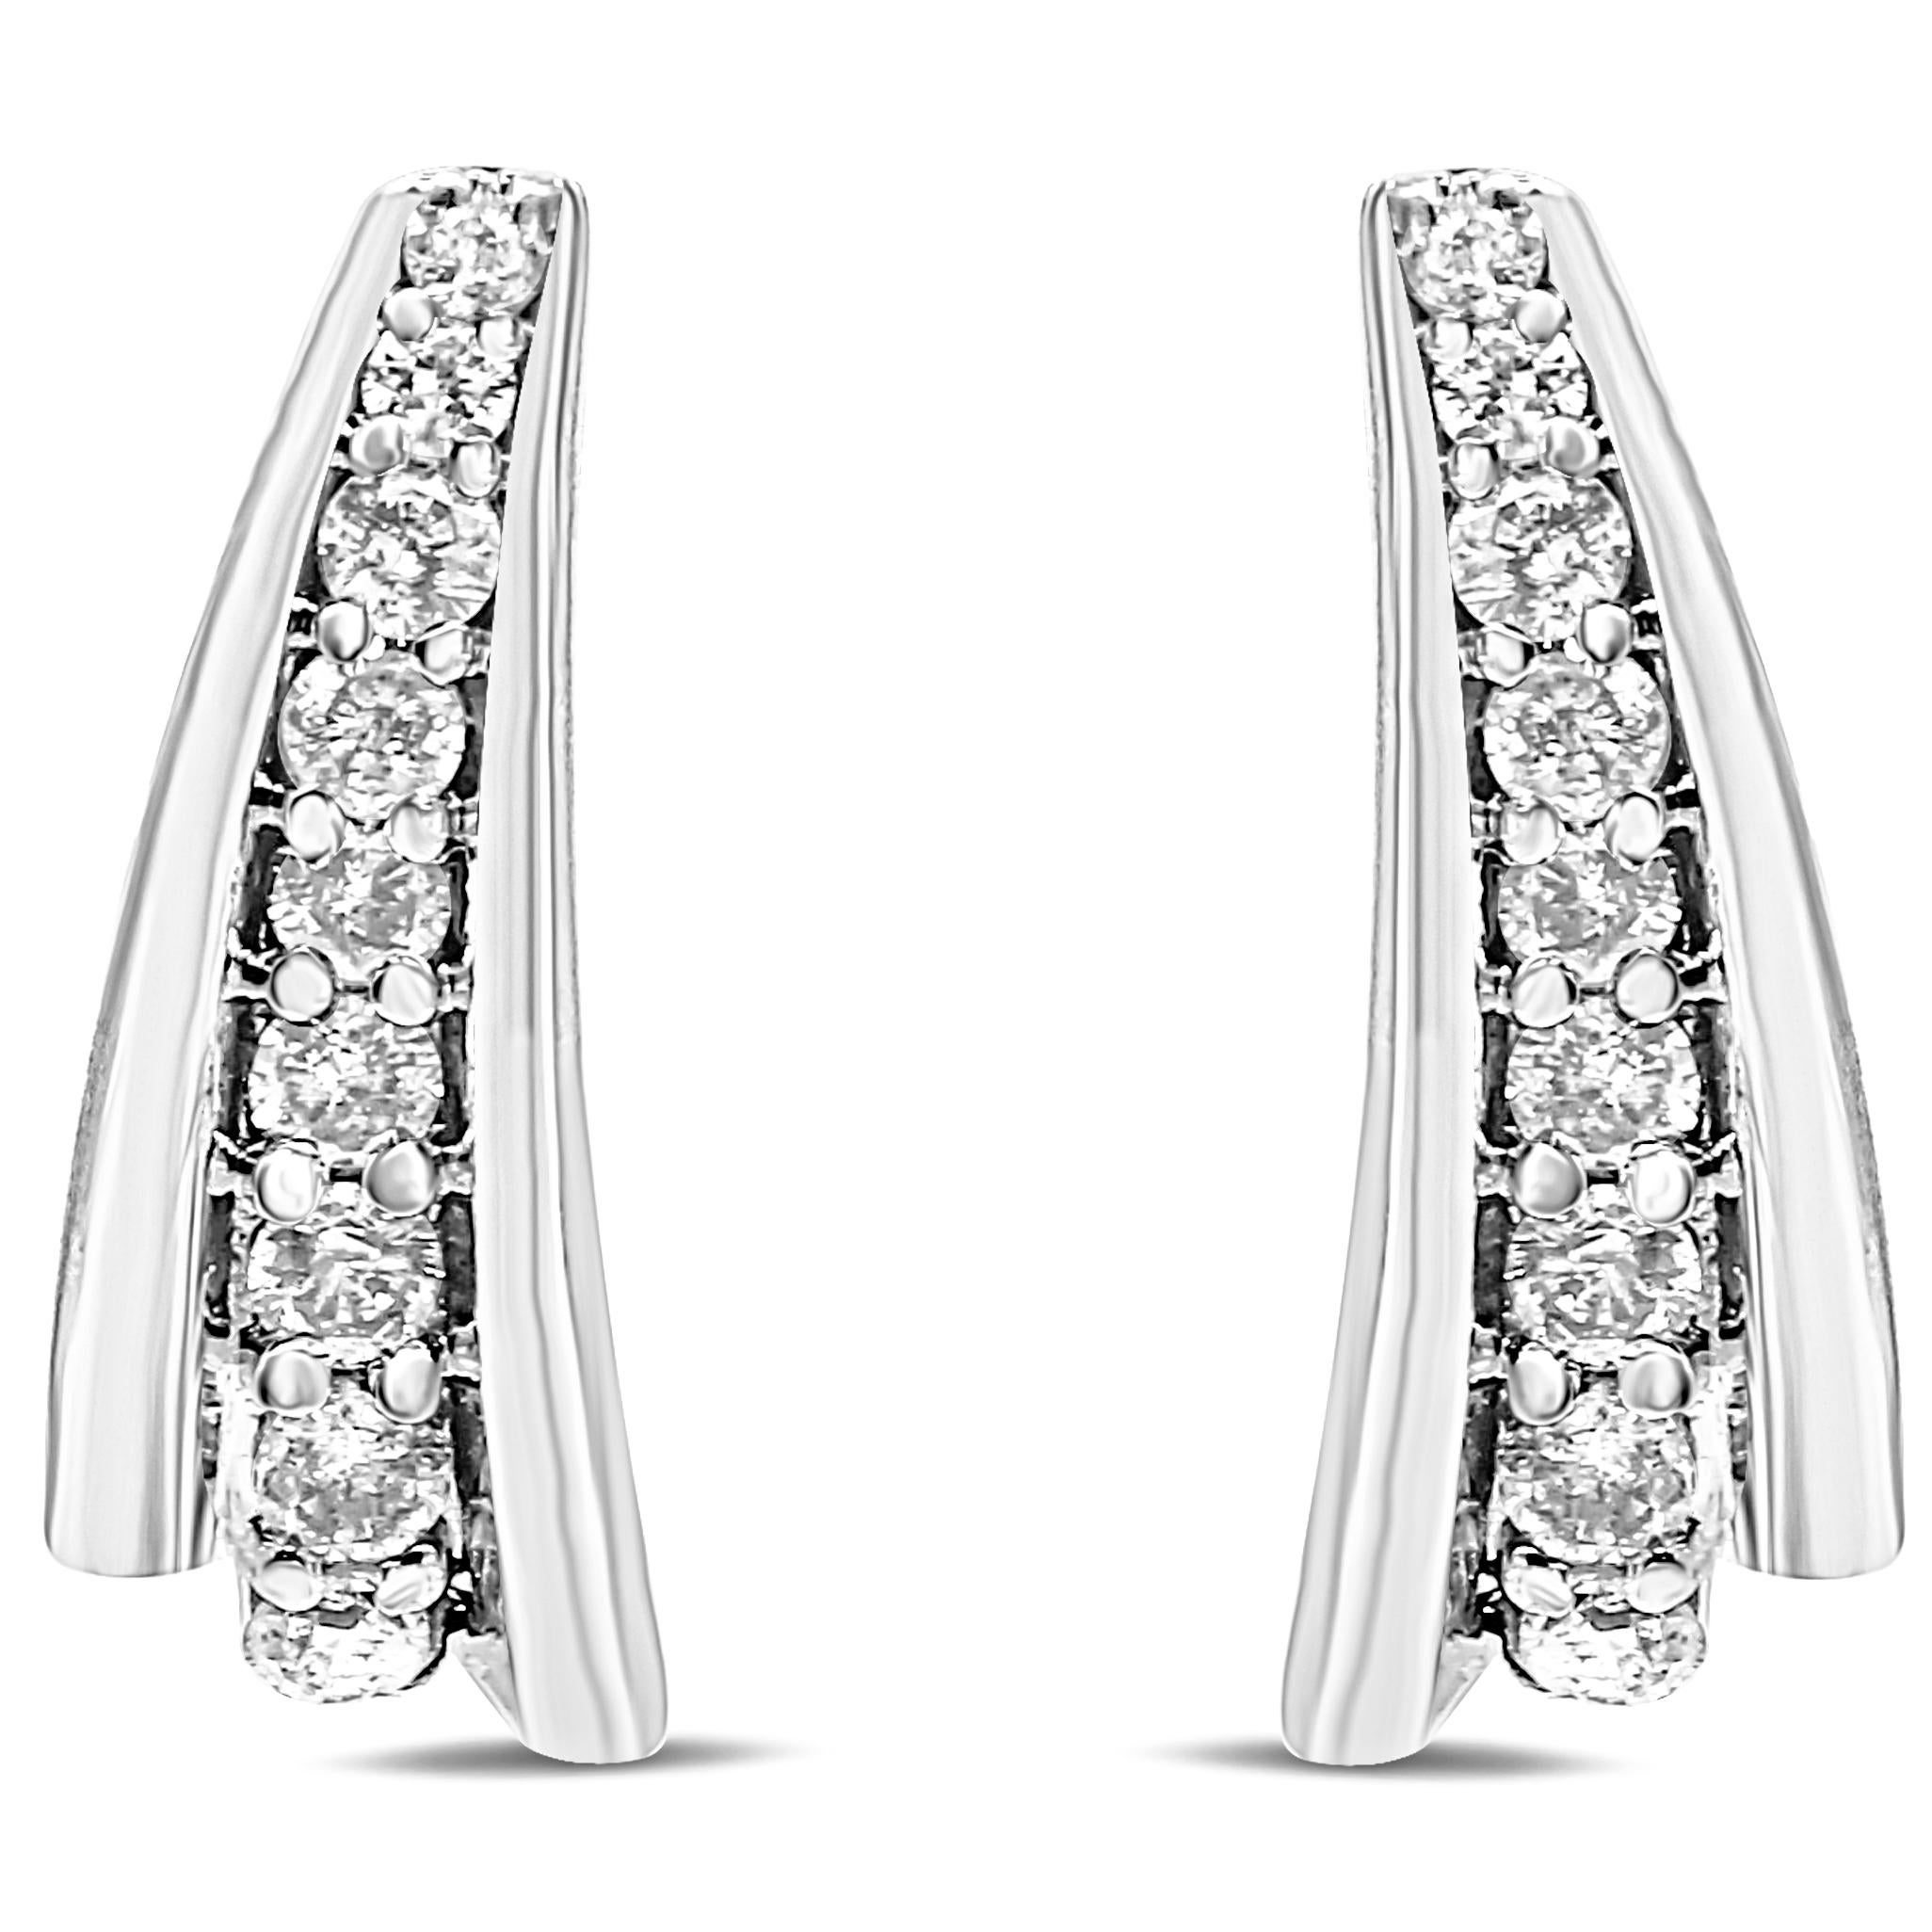 Embellished with natural diamonds, these striking 1.00 c.t. earrings are not your average huggy hoops. Take a closer look and you’ll notice that they feature an asymmetrical silhouette that radiates a modern allure, and it’s perfect for ladies who’d